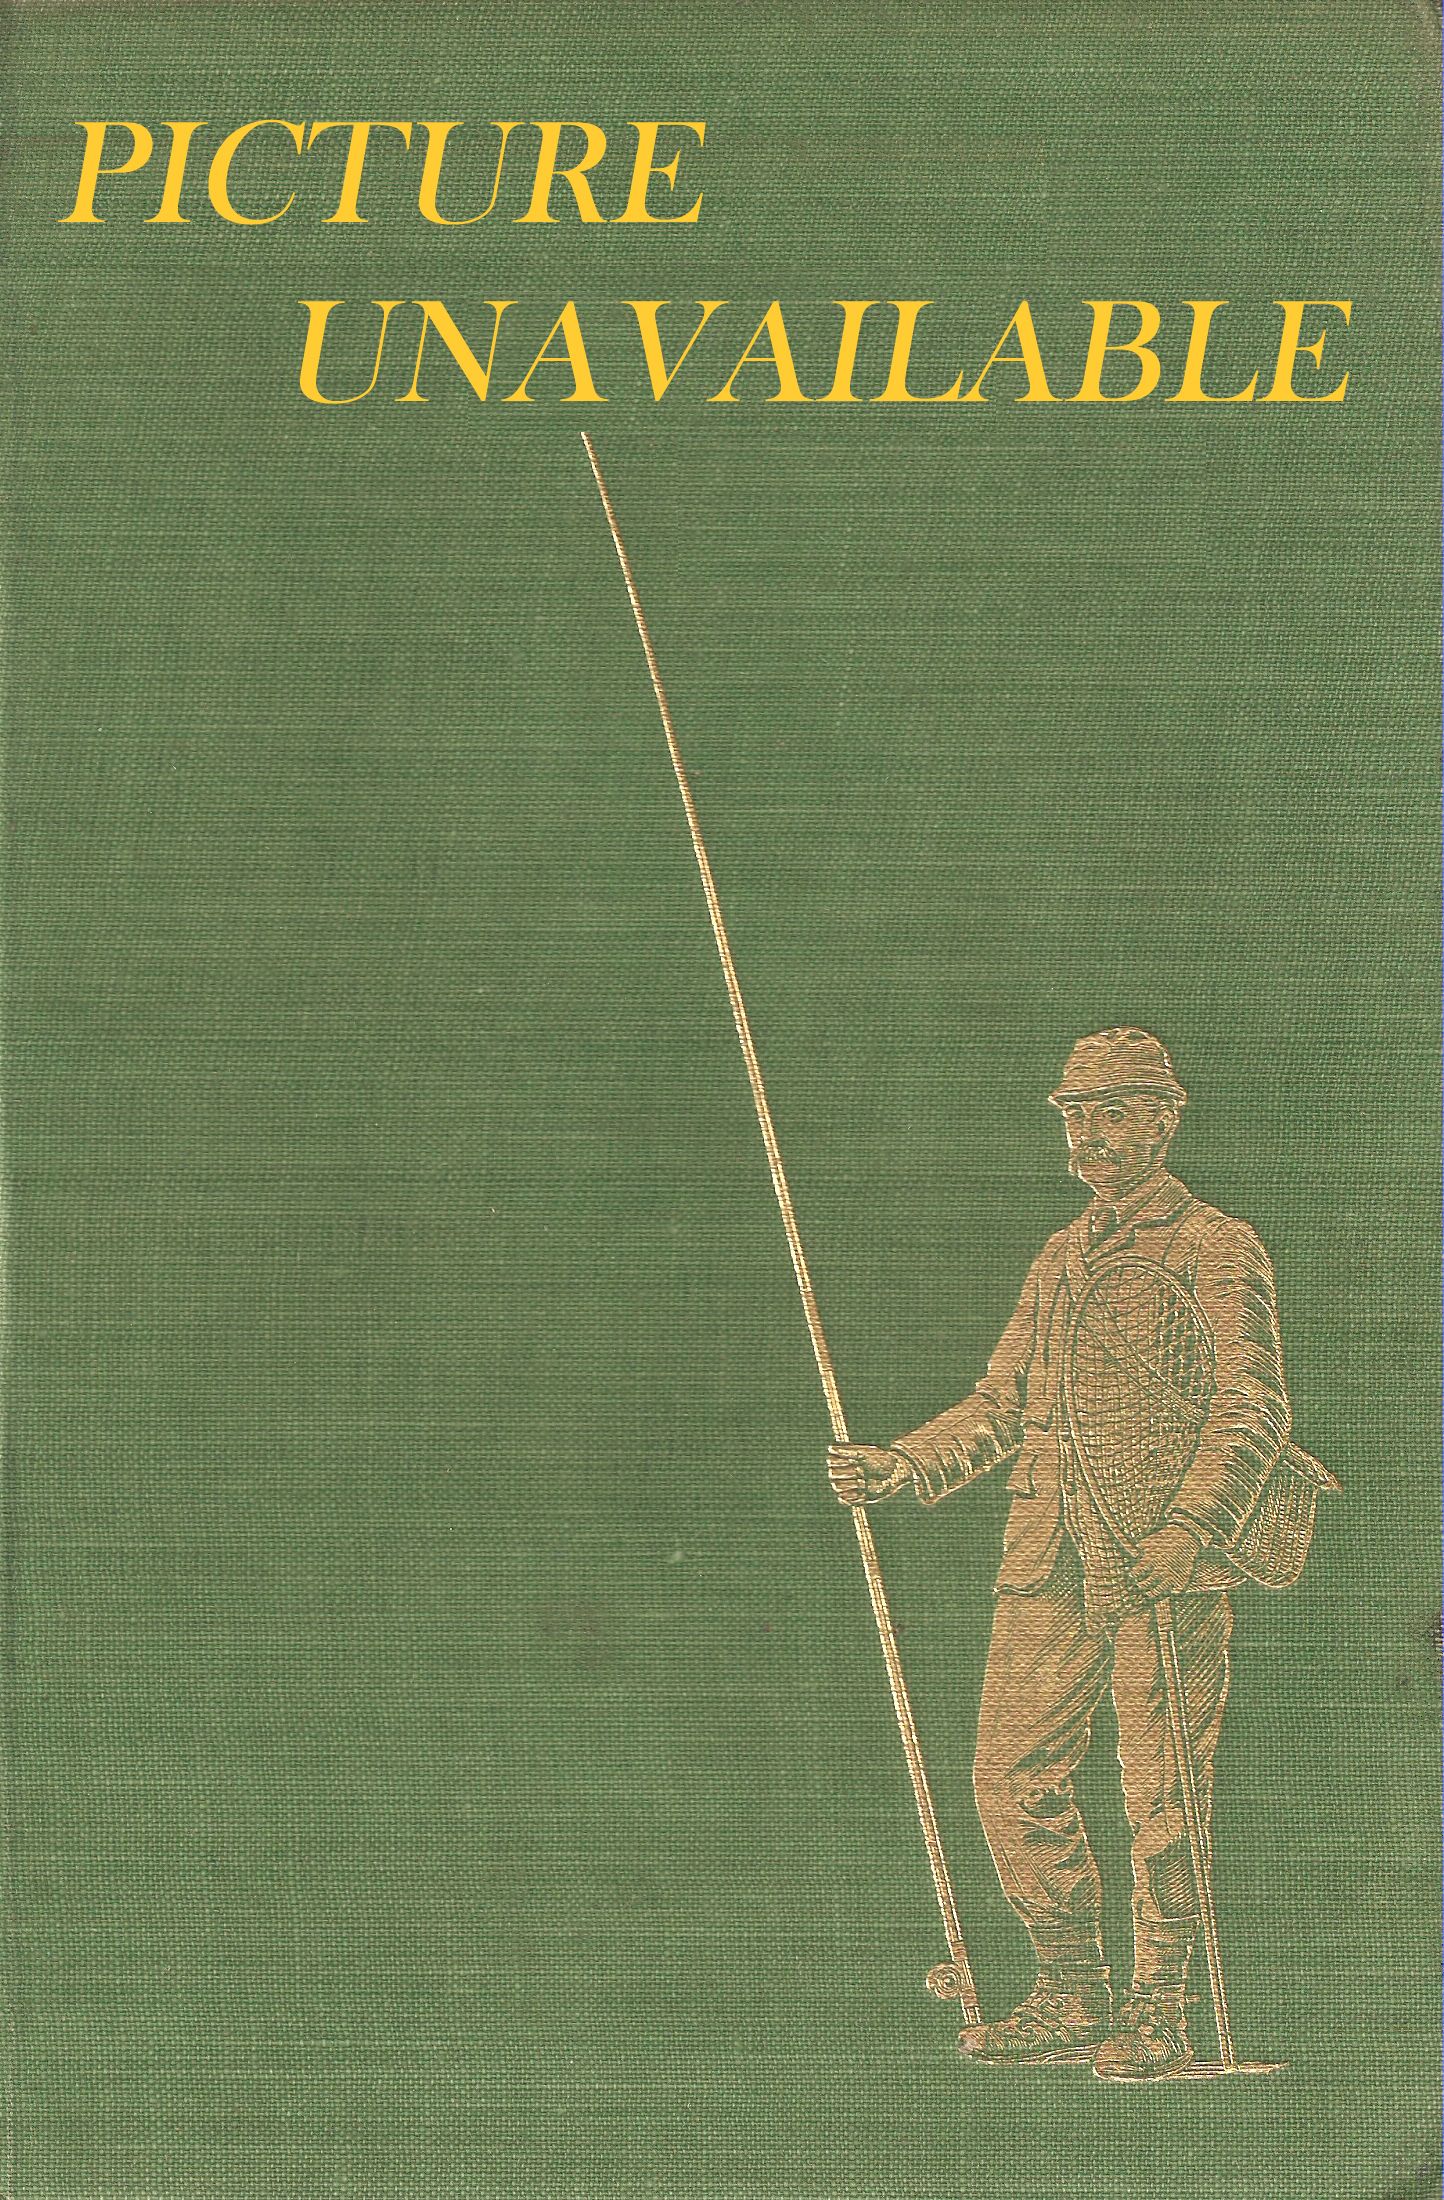 THE STUDY OF STONEFLIES, MAYFLIES AND CADDIS FLIES. By T.T. Macan. Volume Seventeen of the Amateur Entomologist. General Editor Peter W. Cribb.